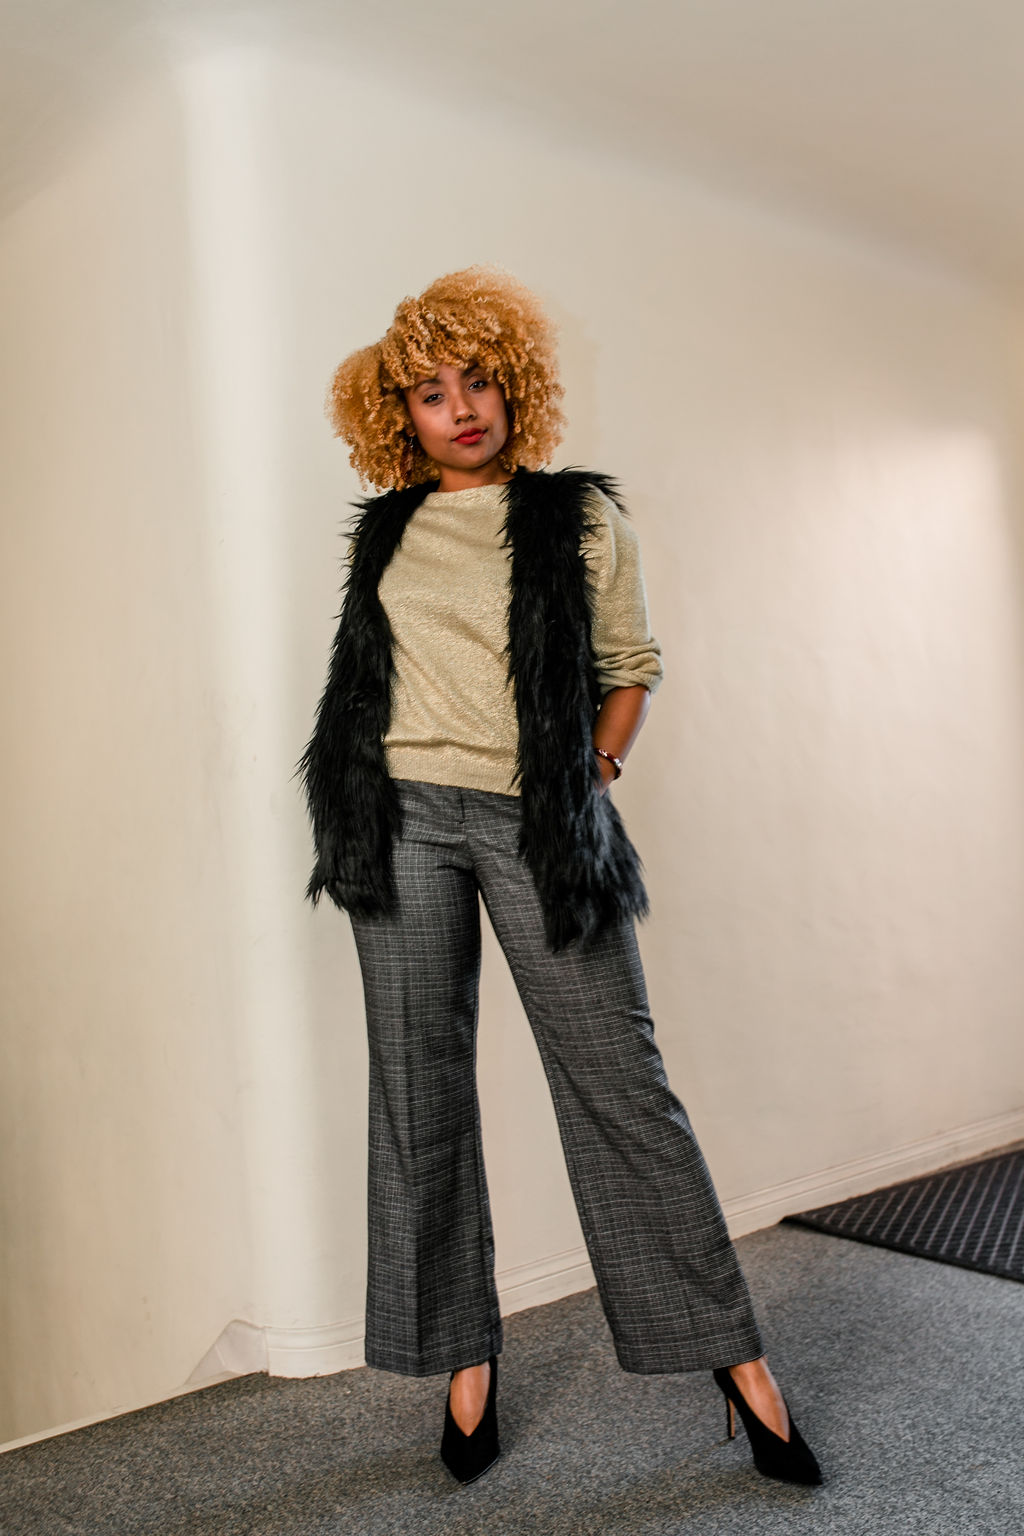 reflect -RSEE-LCM-Liveclothesminded-xmmtt-longbeach-2208-wear who you are-slacks-gold sweater-blonde curls-how to wear slacks-7 big moments- faux fur vest